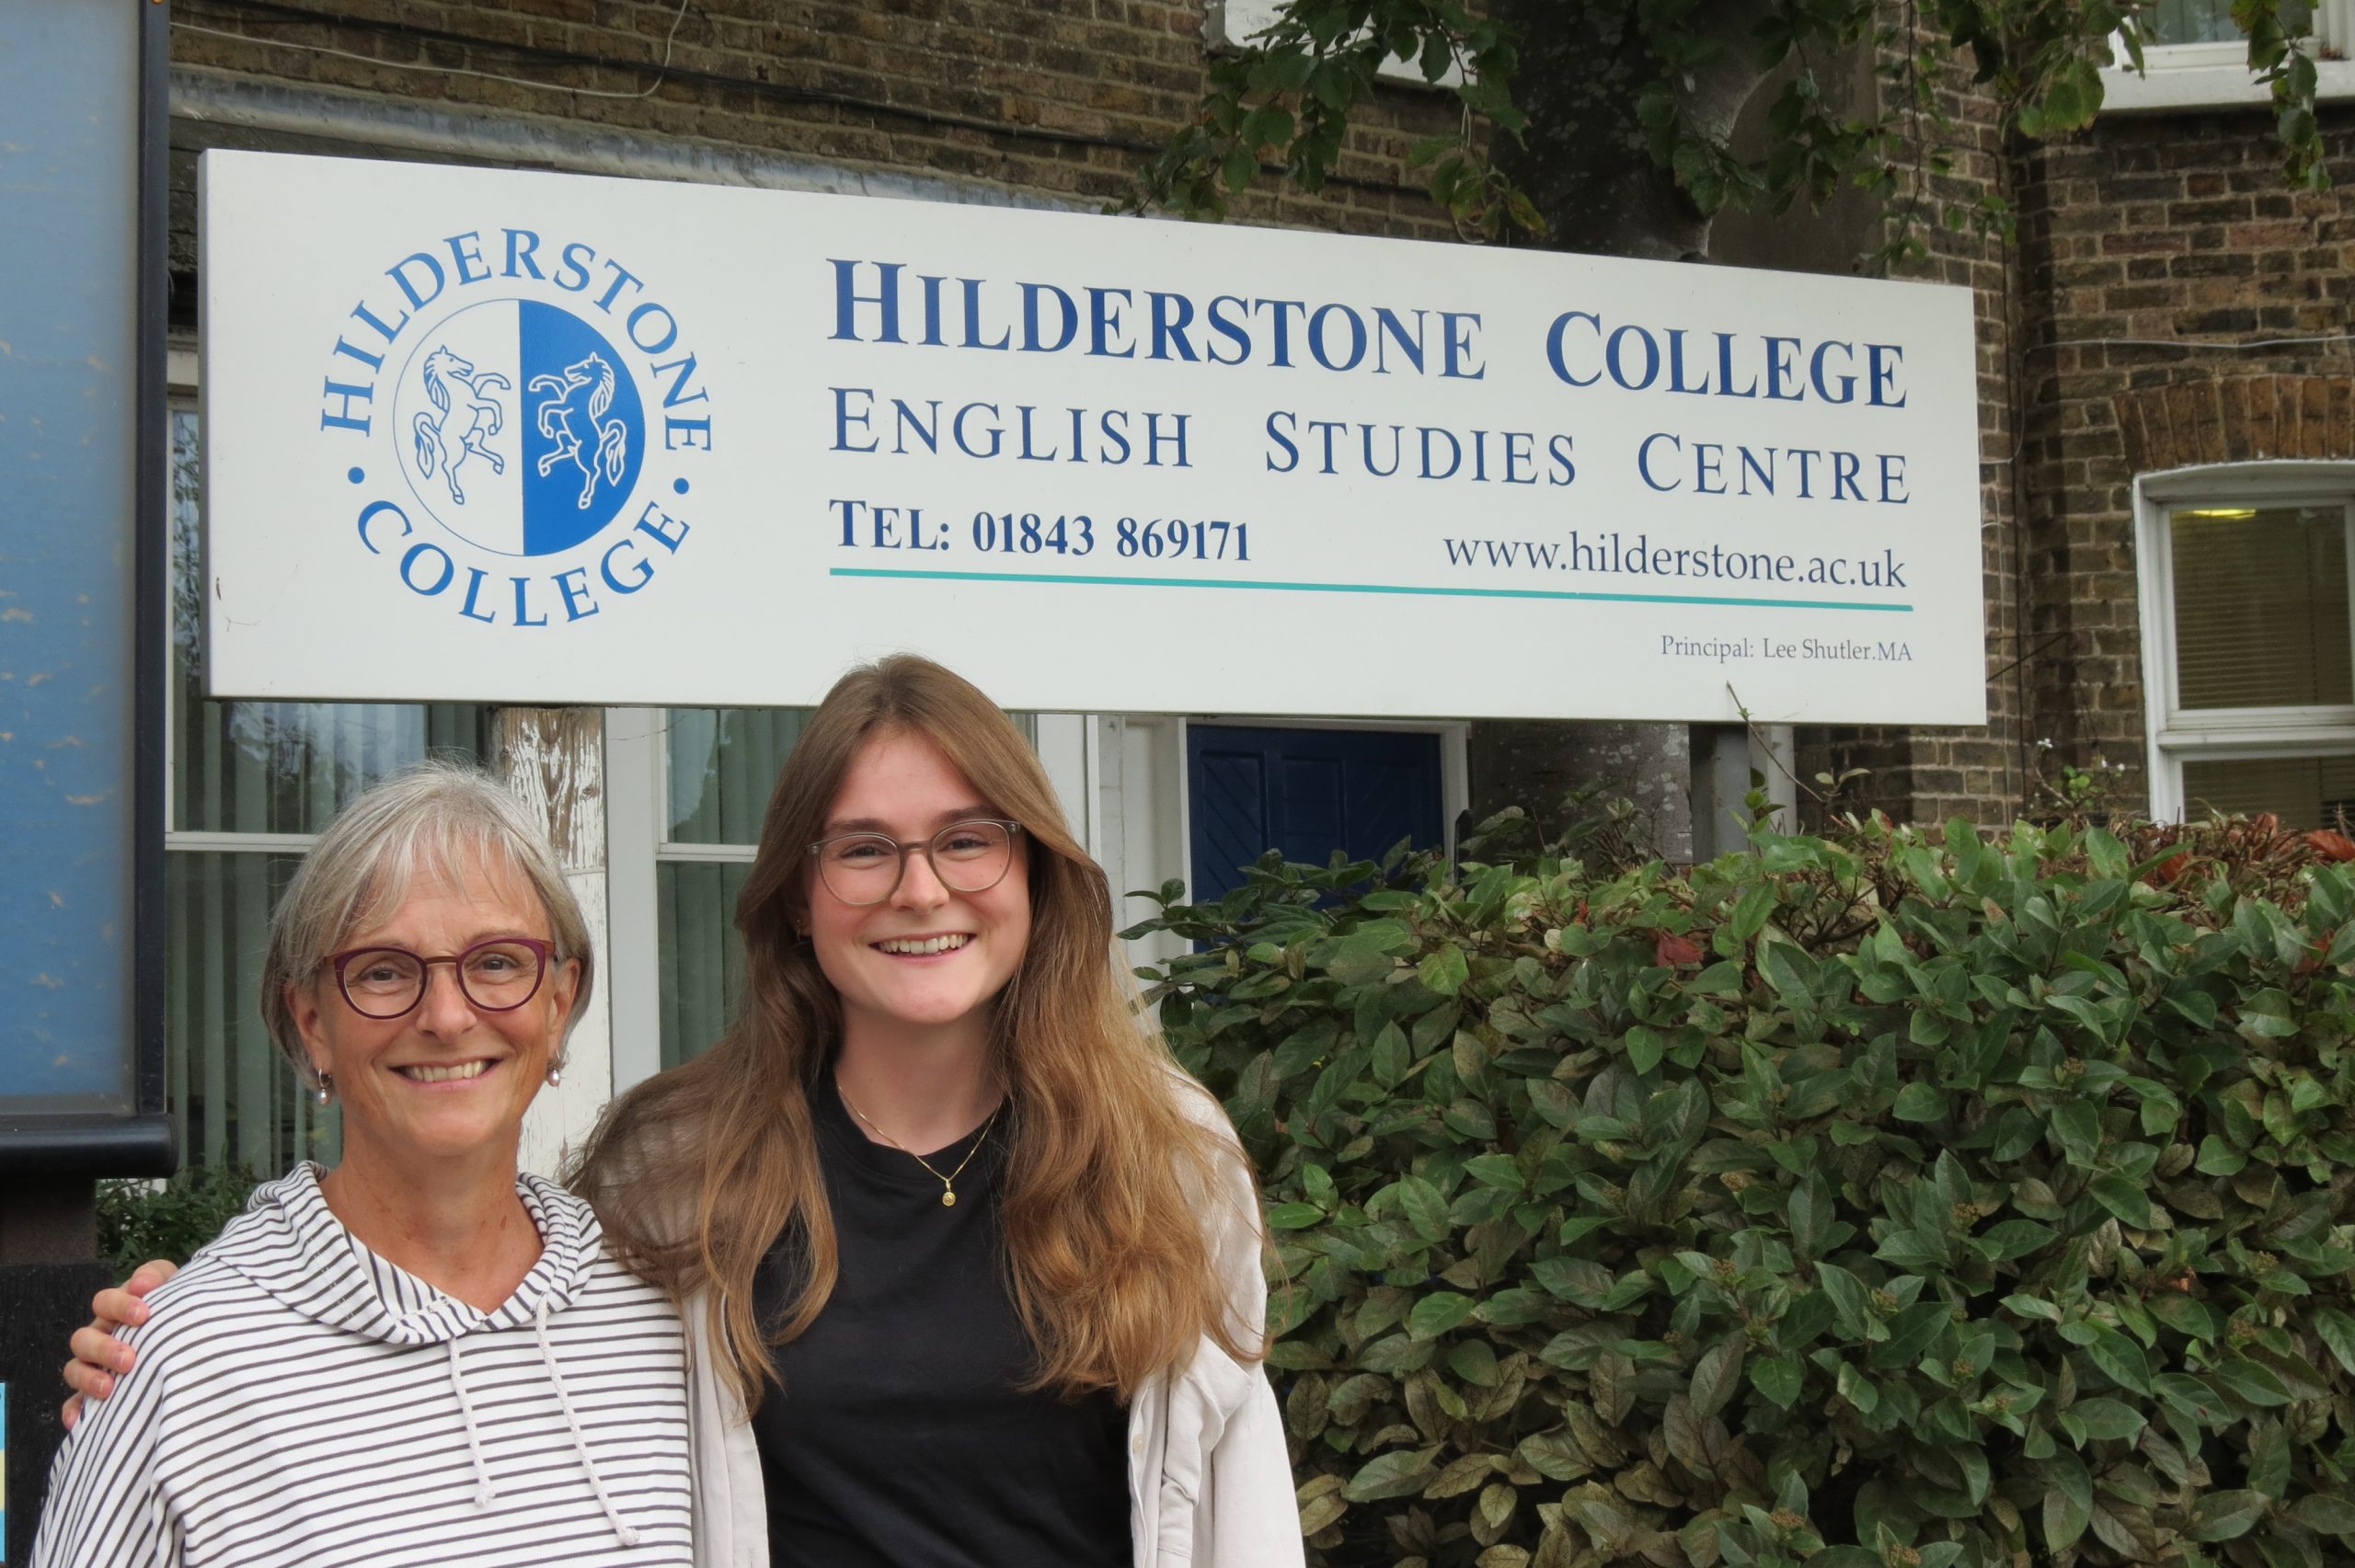 Daughter follows in her mother’s footsteps to Hilderstone!